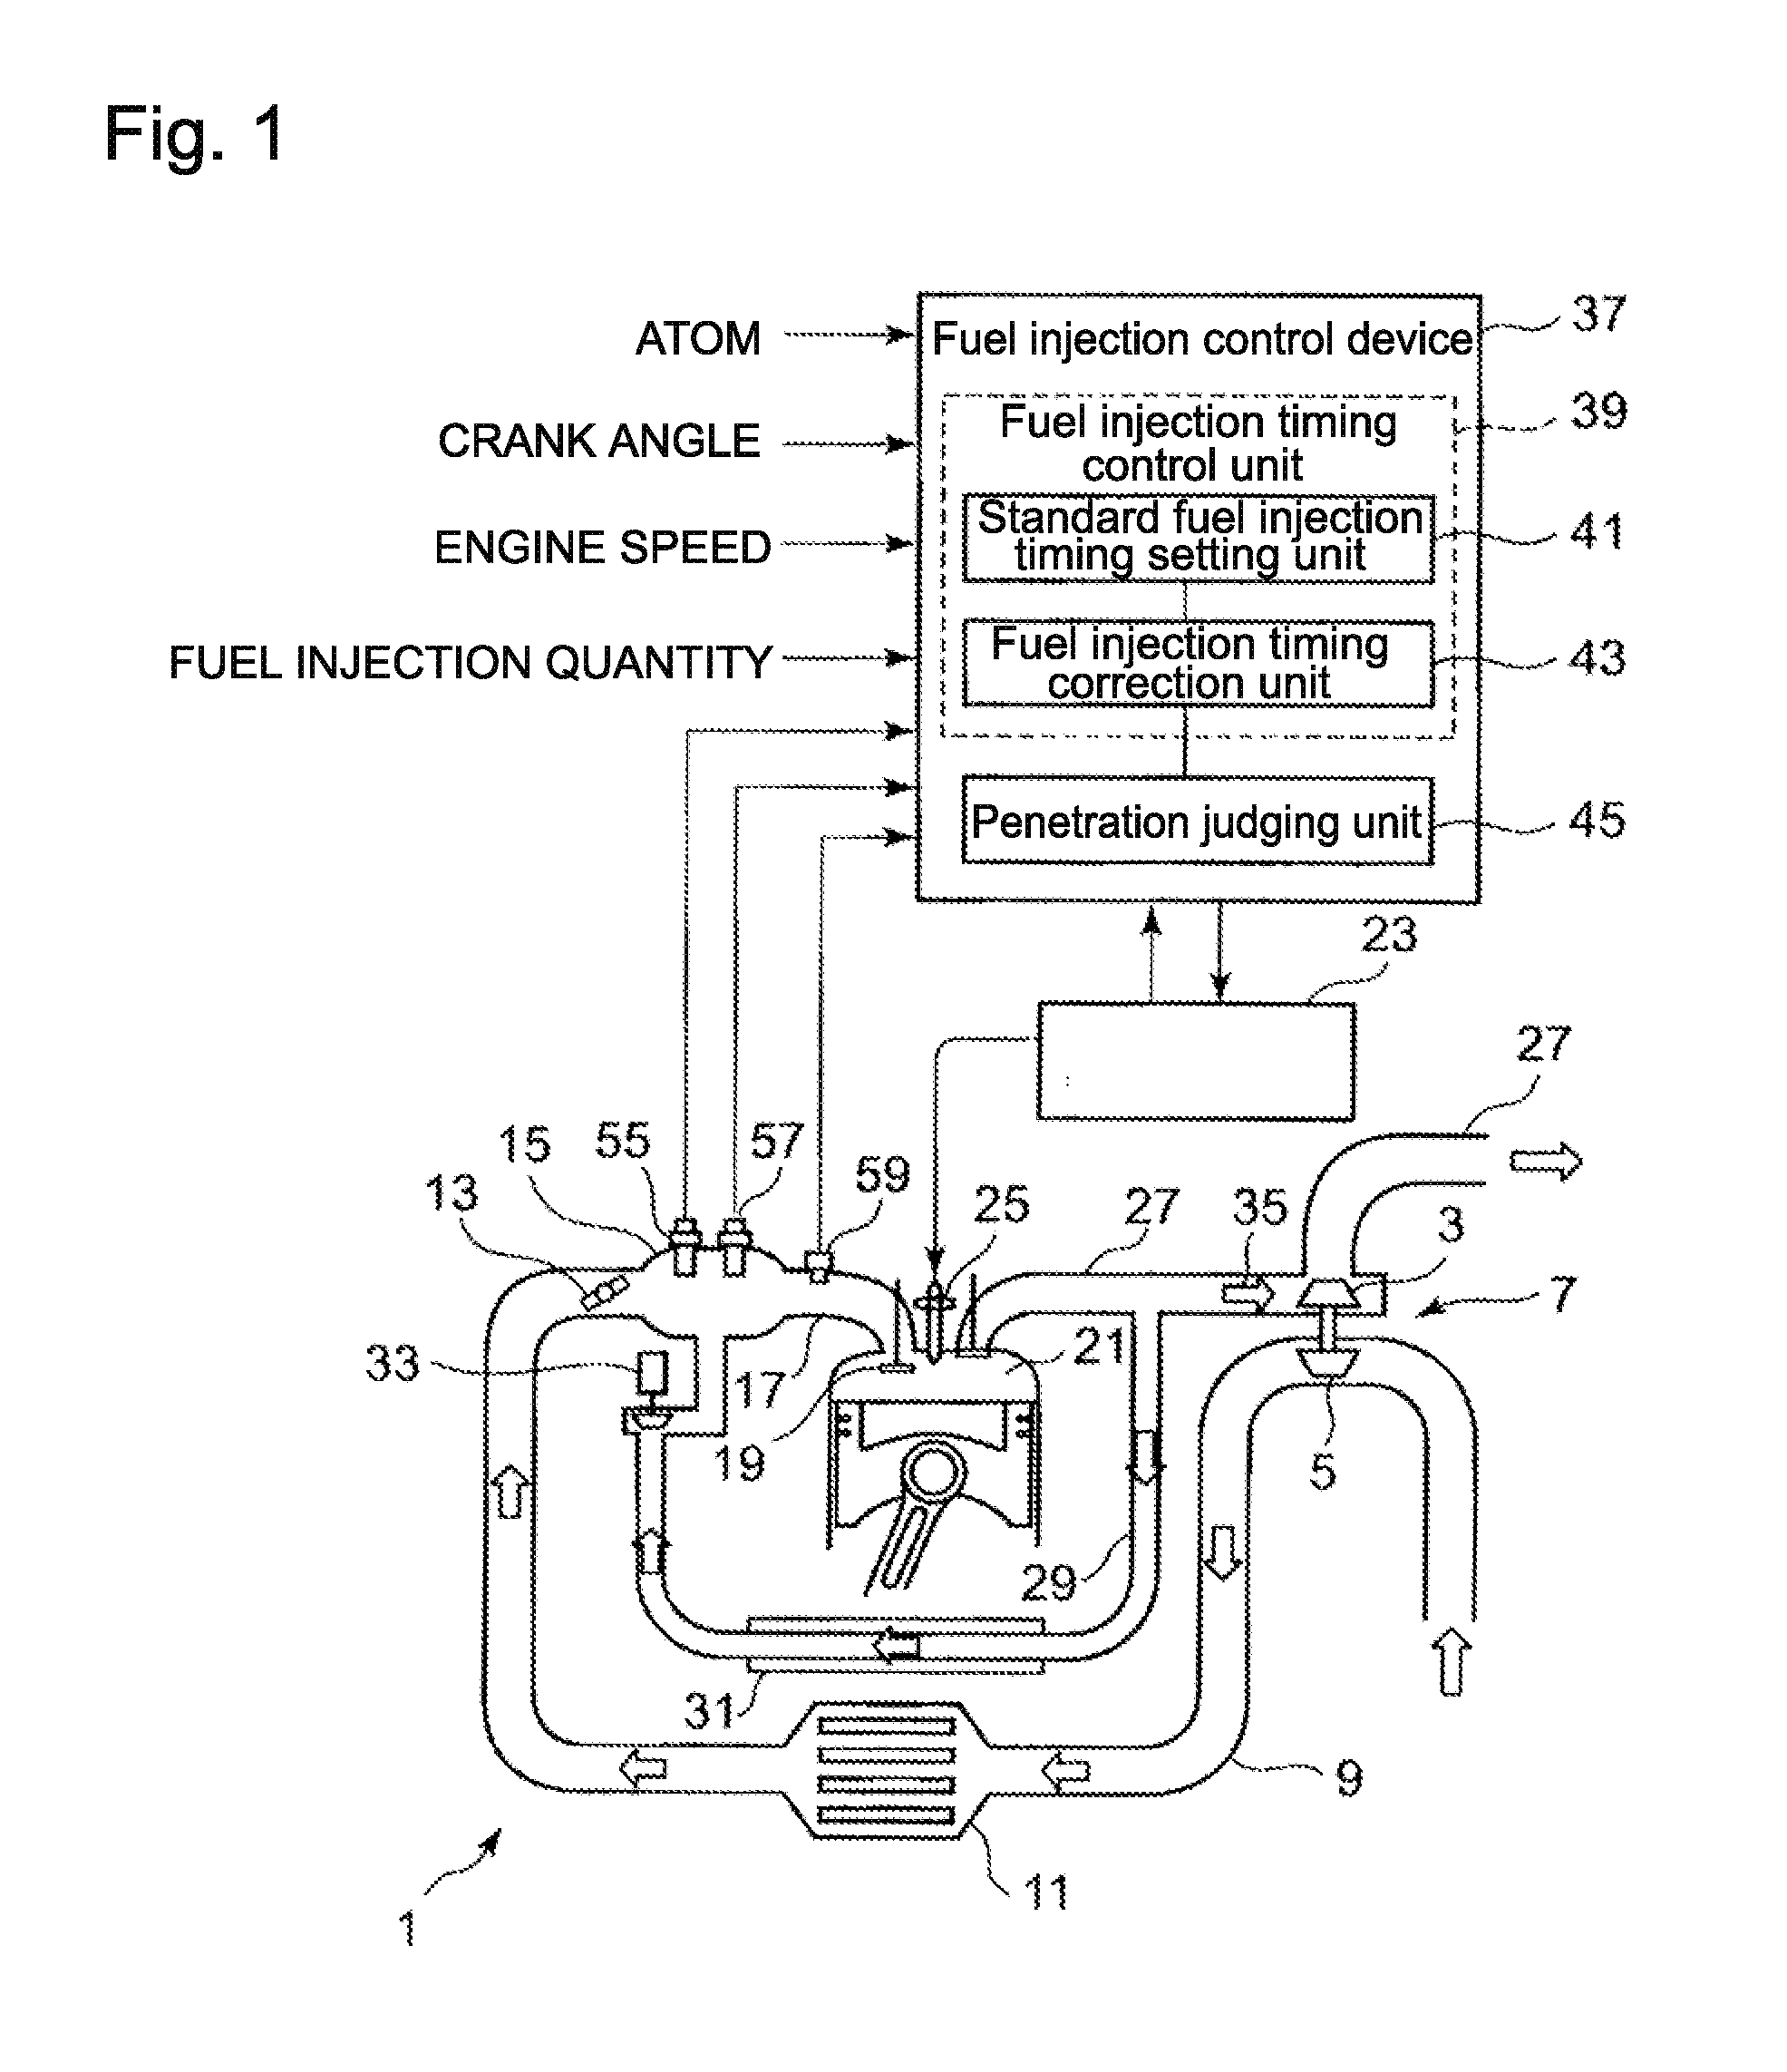 Fuel injection control device and method of diesel engine